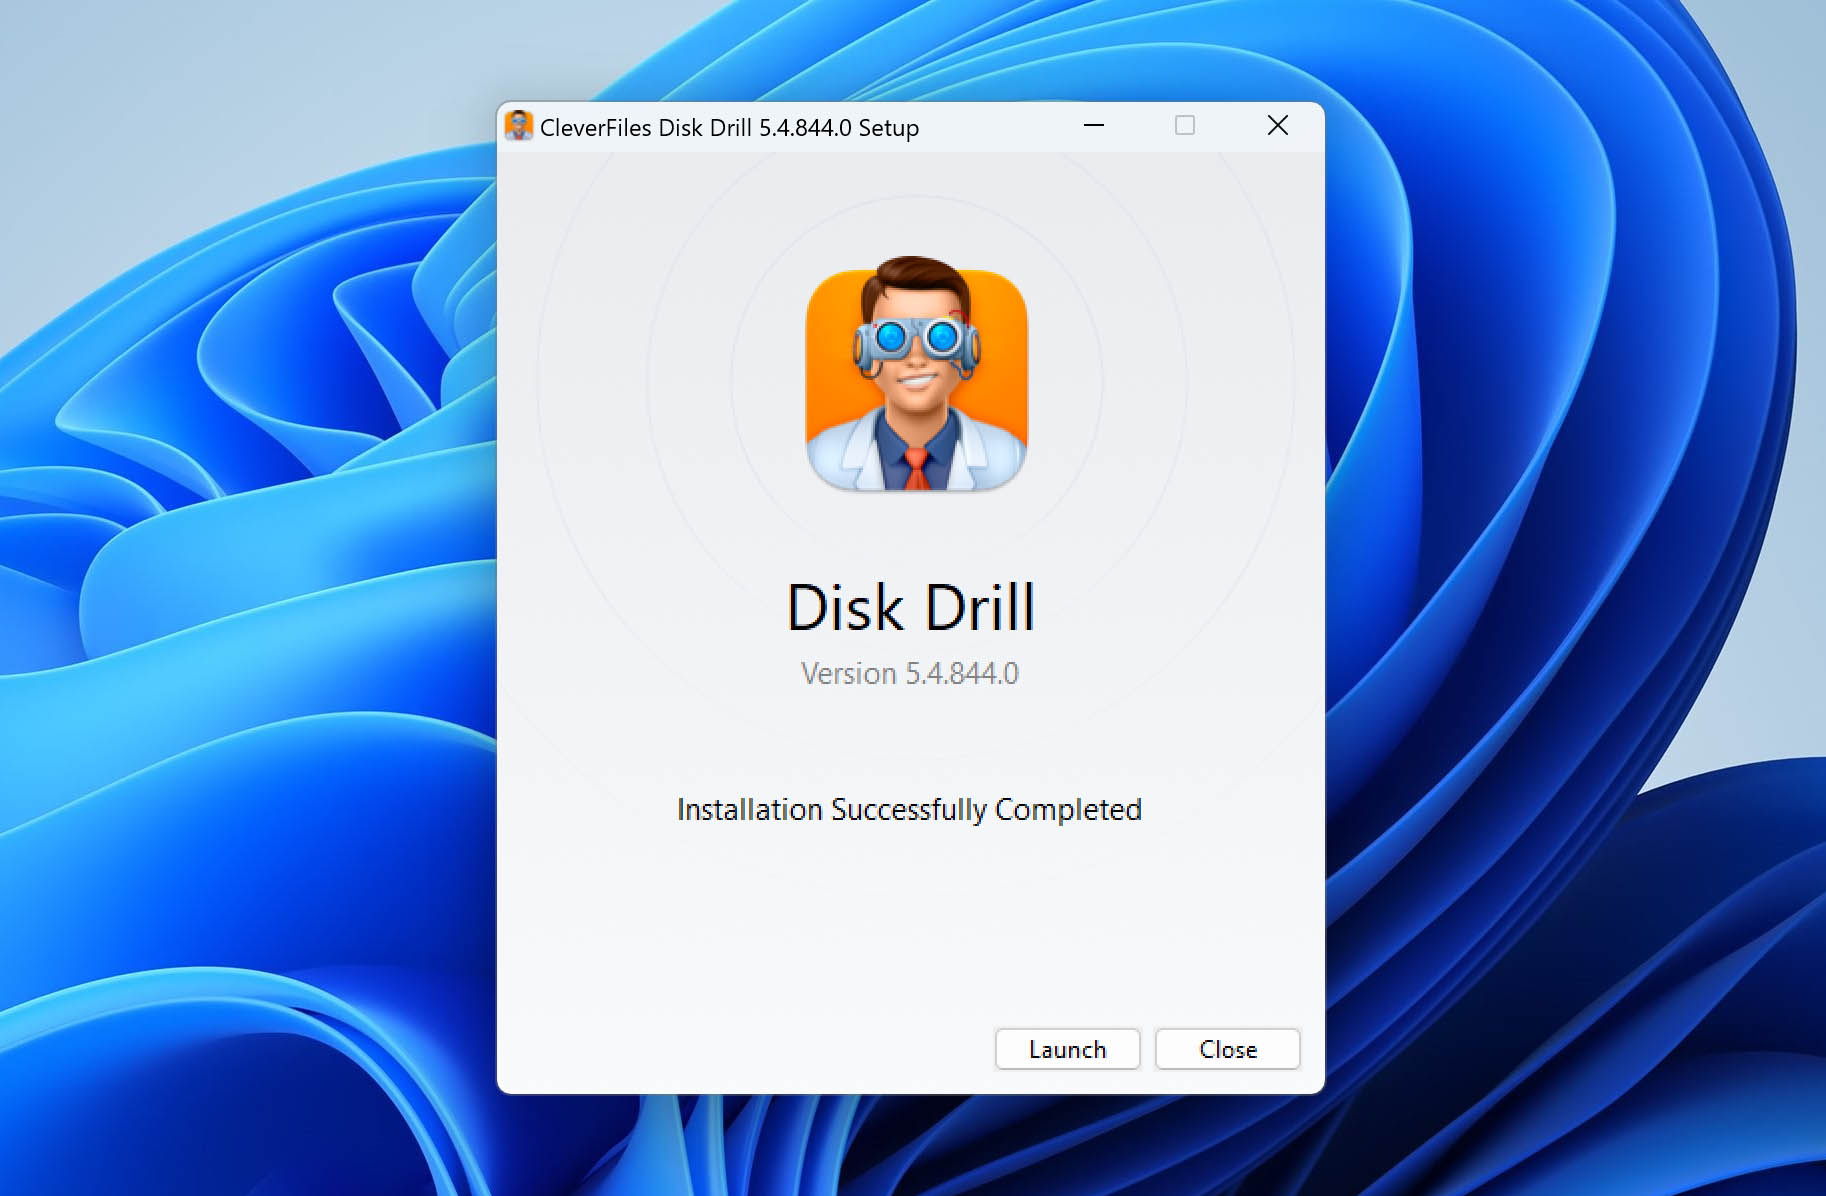 Install disk drill for Windows